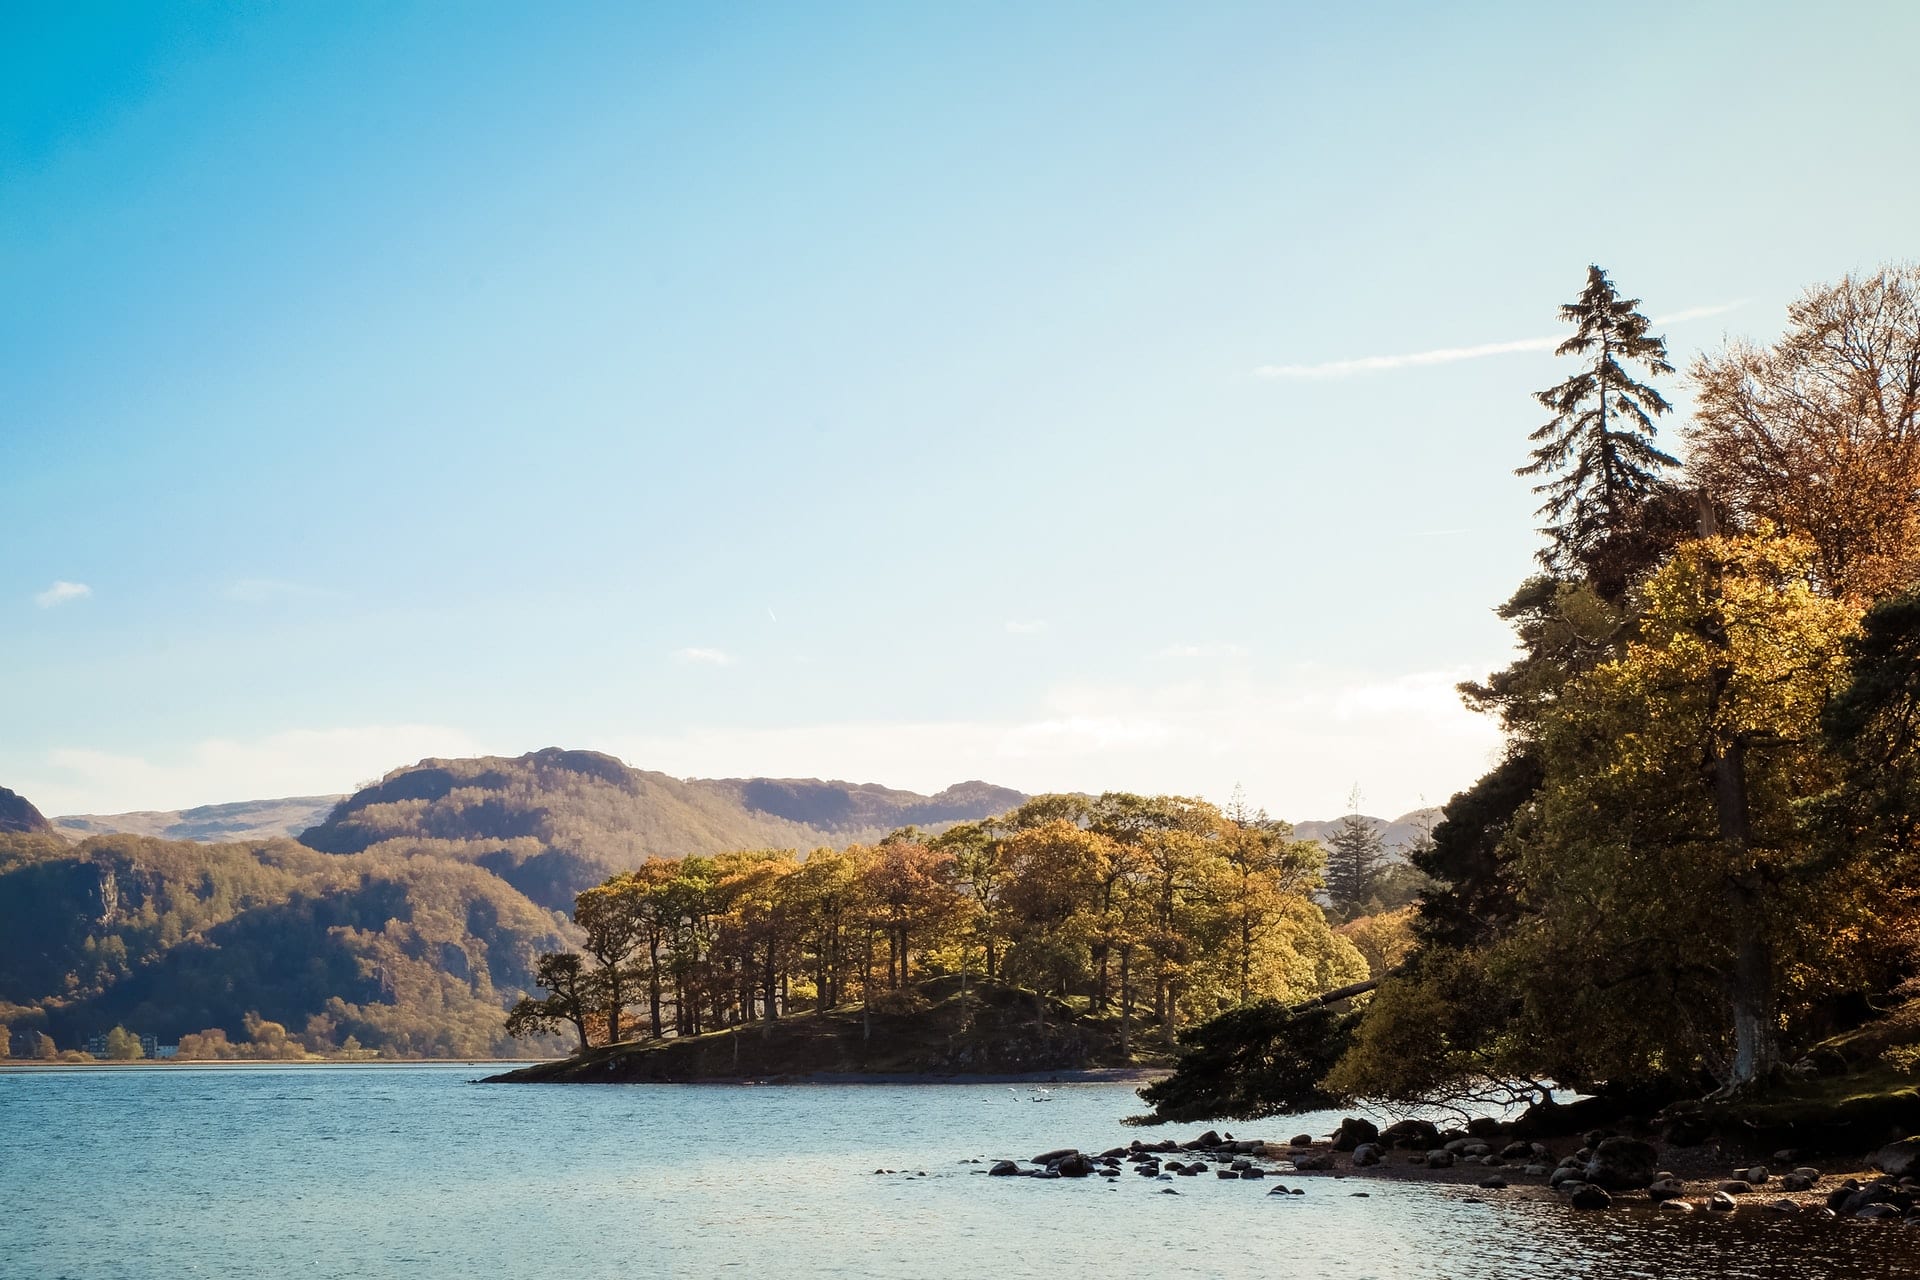 trees-and-mountains-surrounding-lake-with-blue-skies-lake-district-day-trips-from-manchester